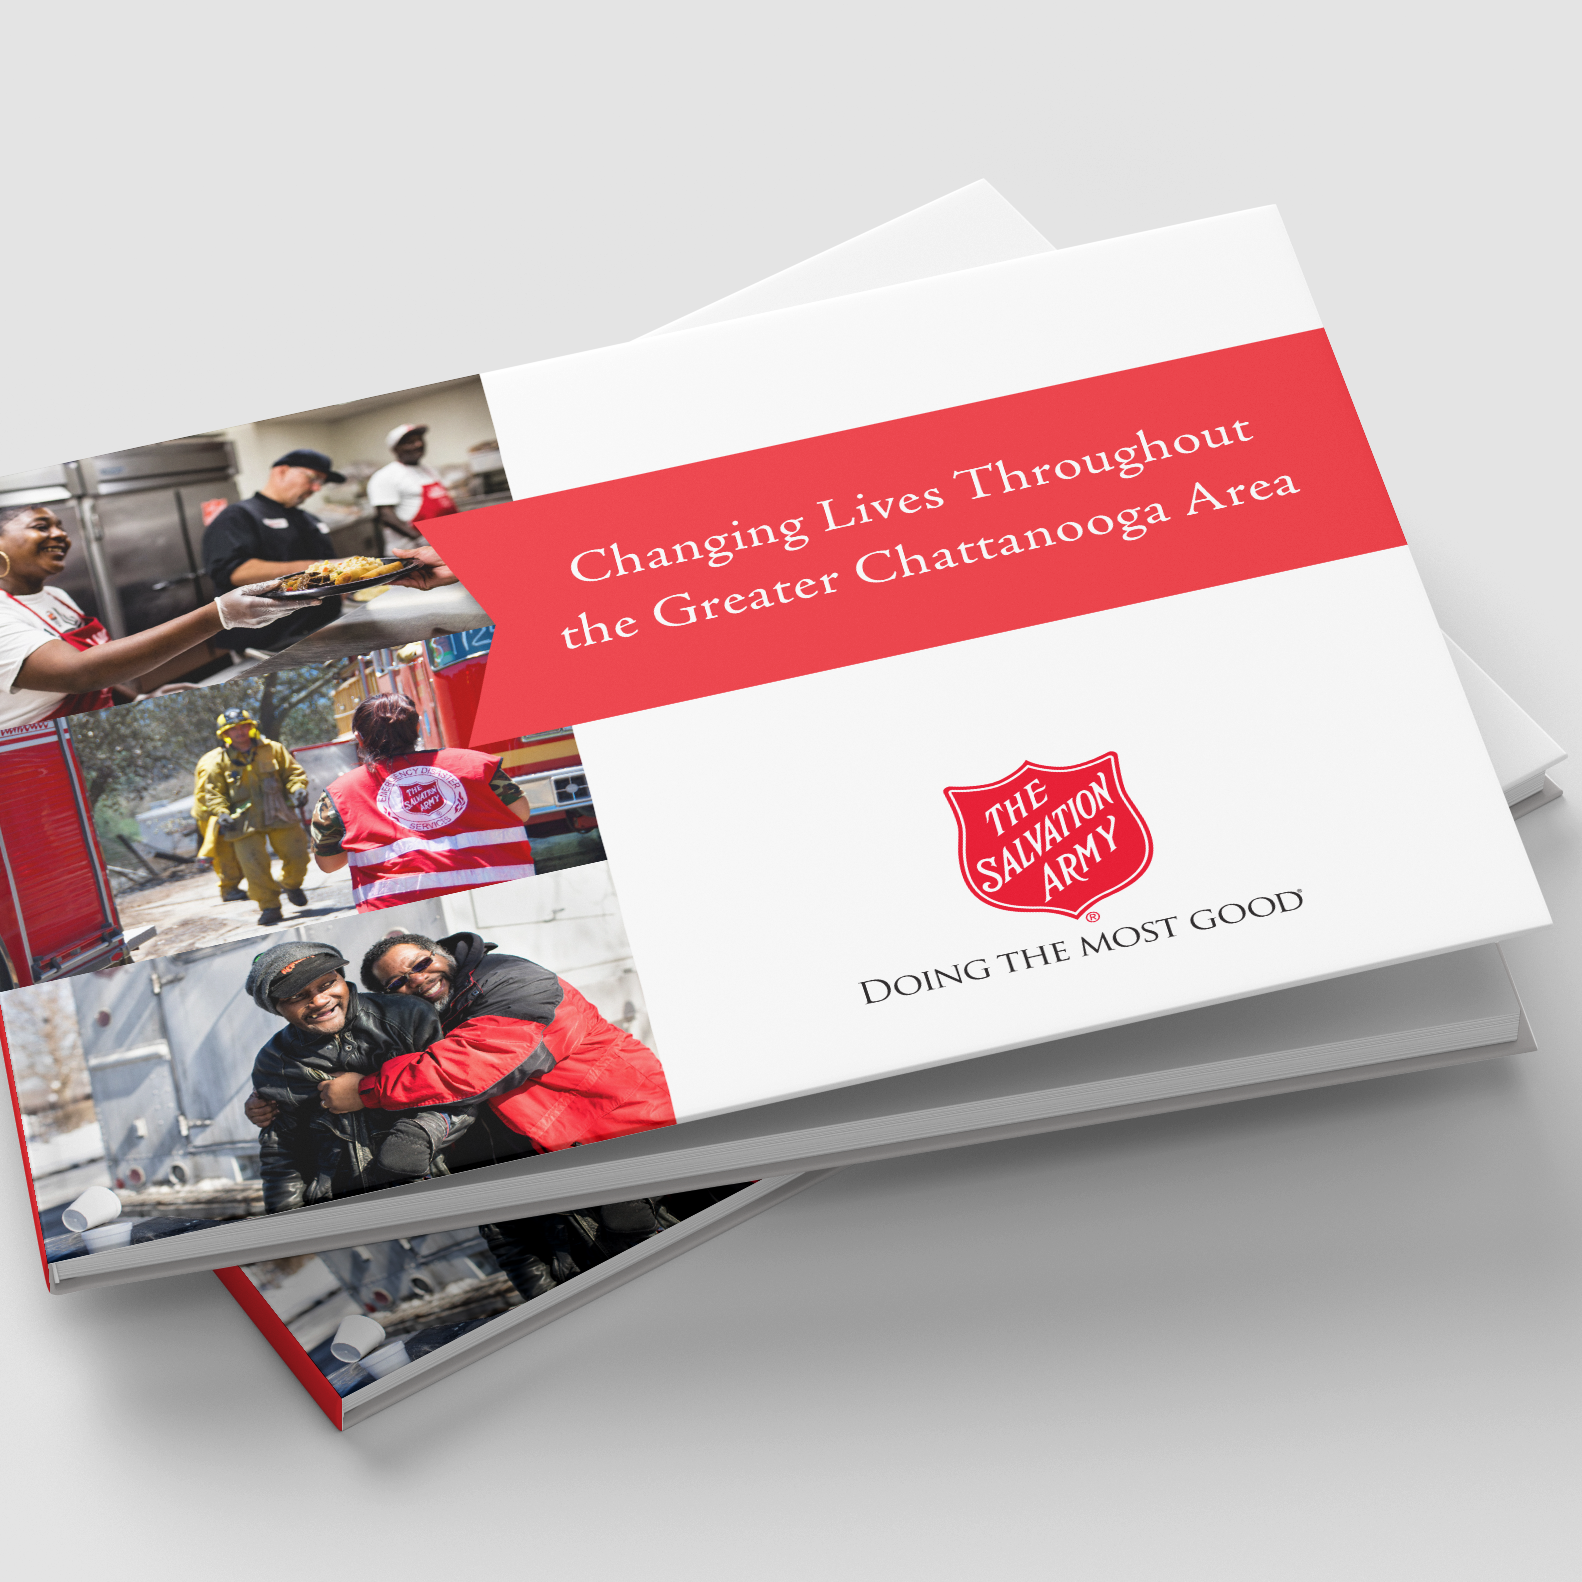 Print materials are an important part of your end-of-year giving campaign.